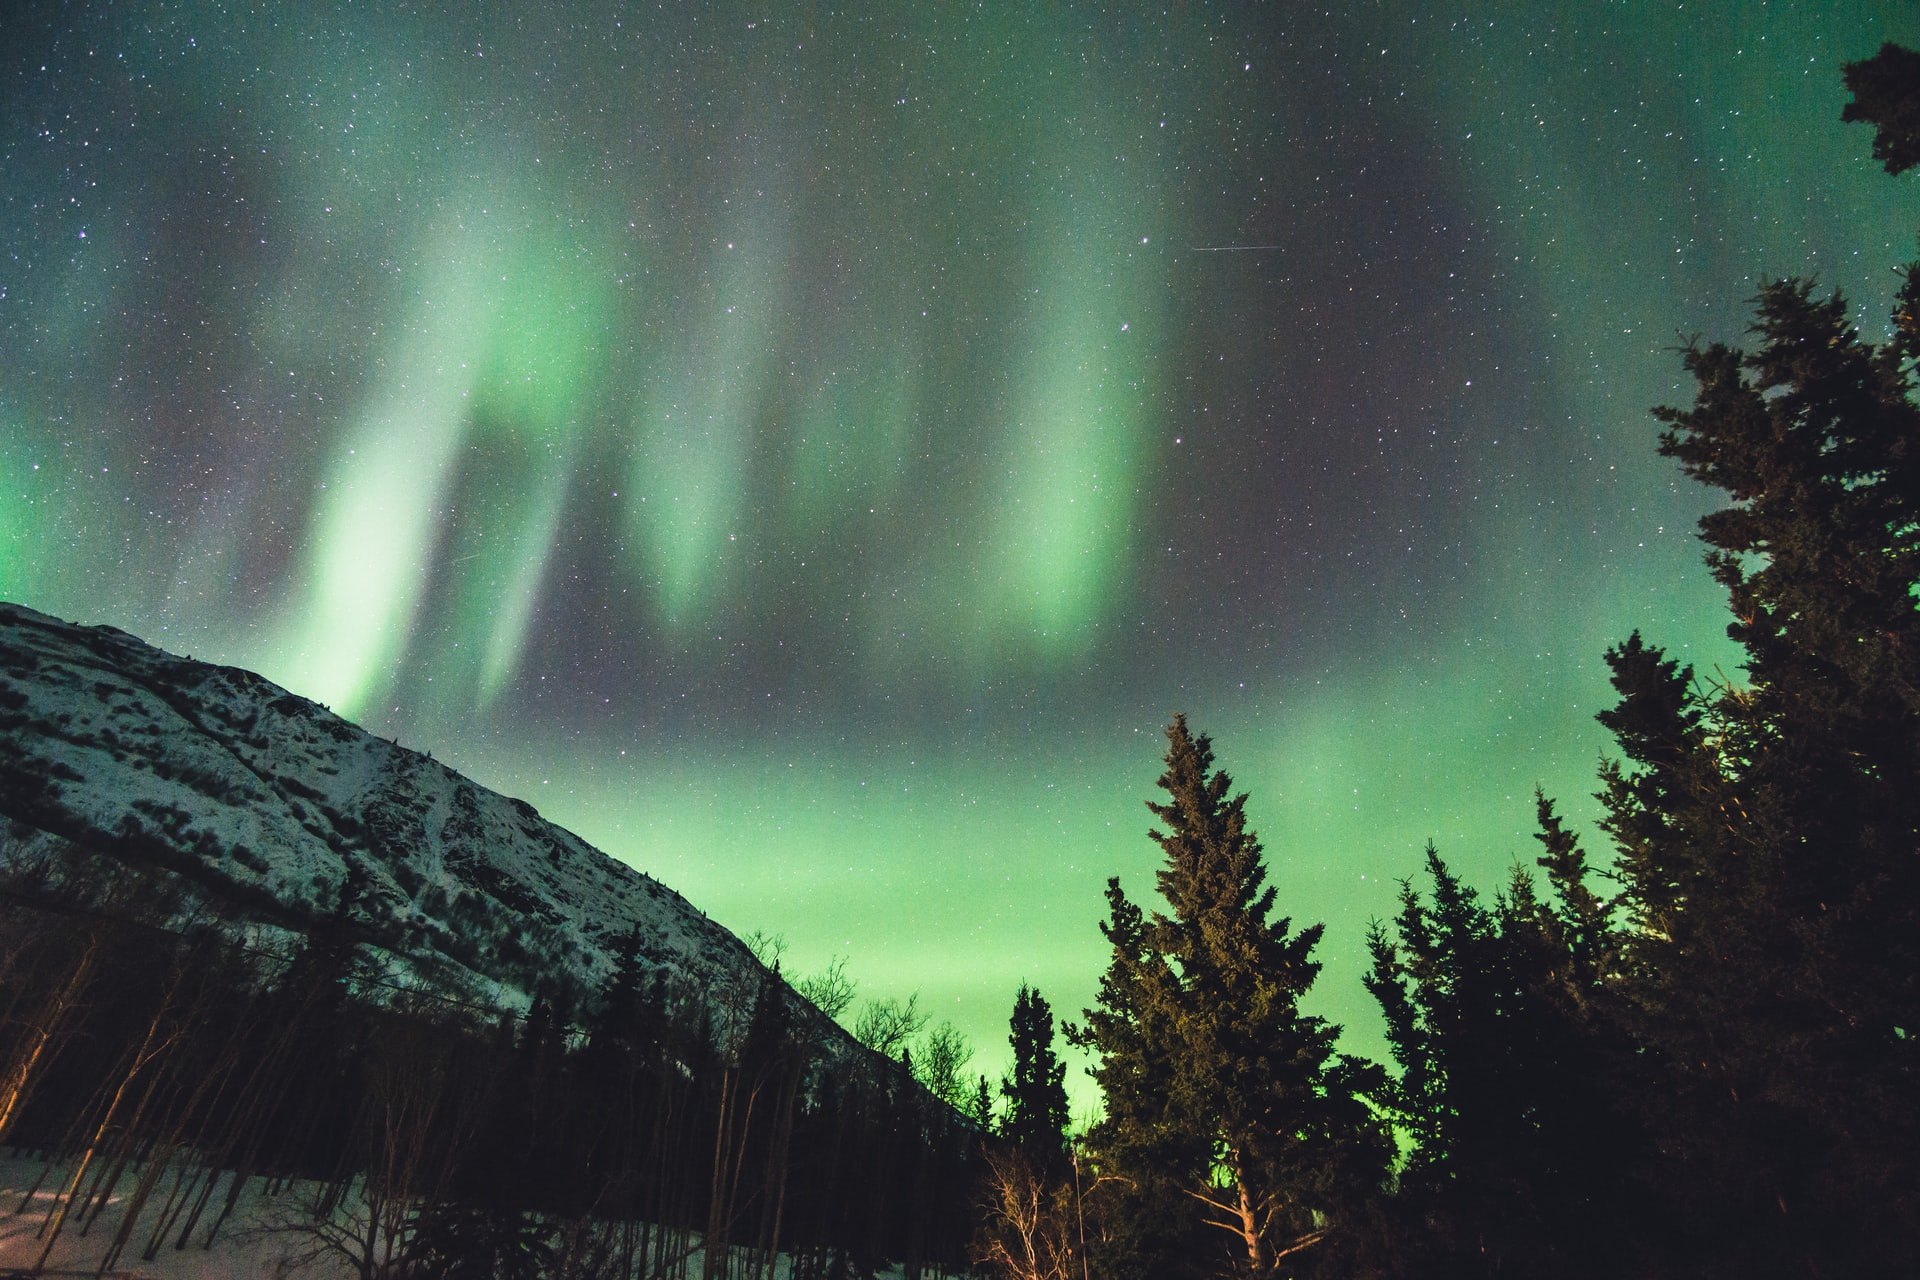 A view of green Northern Lights in the sky above trees and mountains in Yukon.